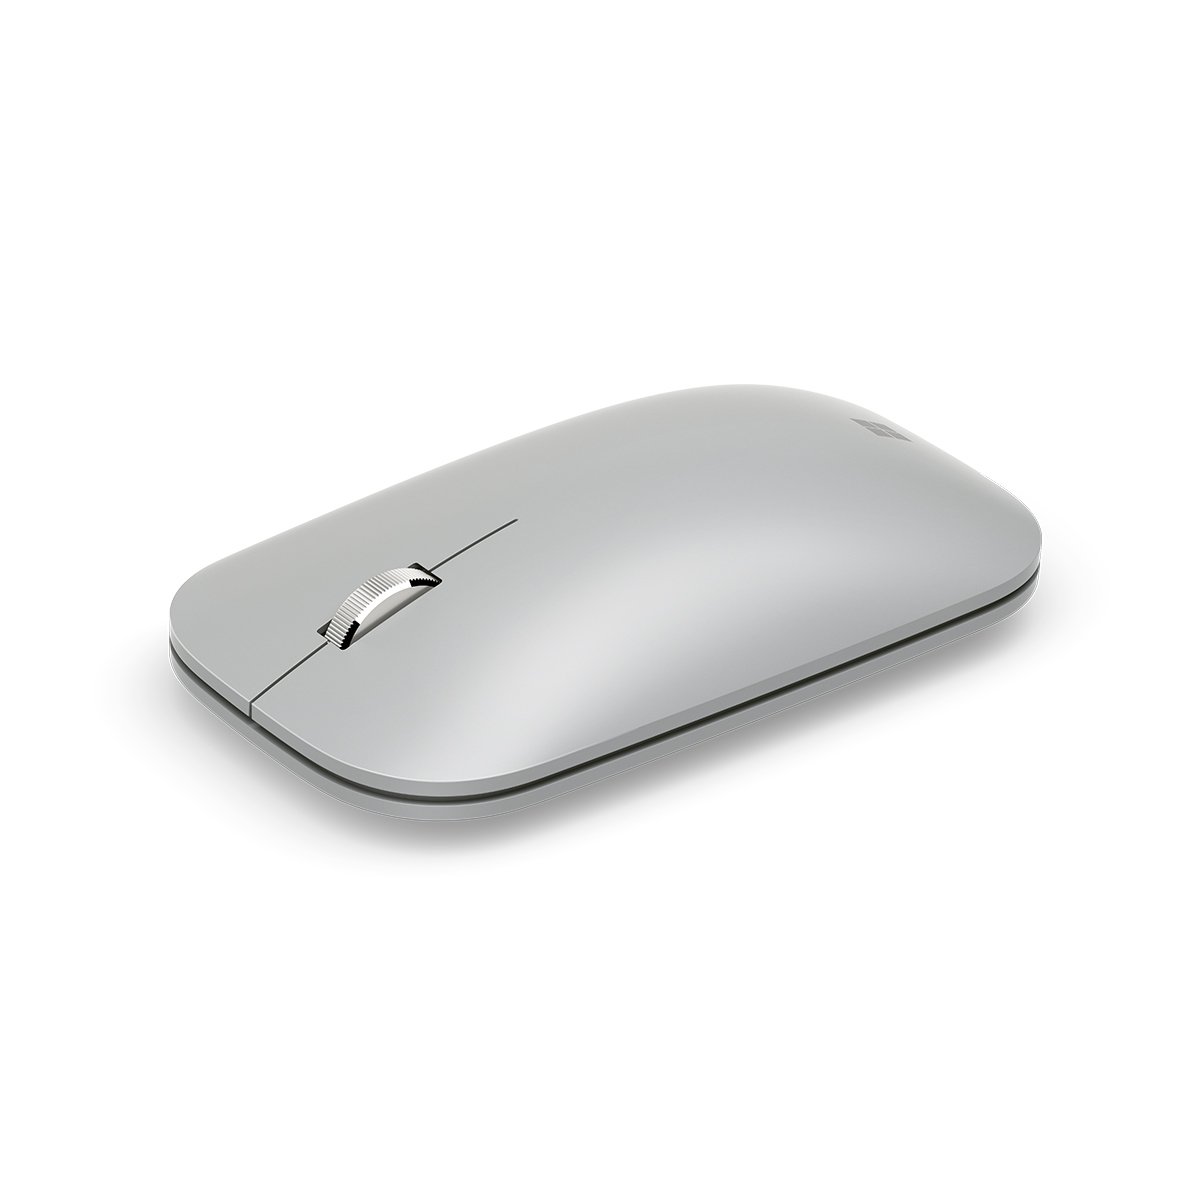 Best Mouse for iPad 2021